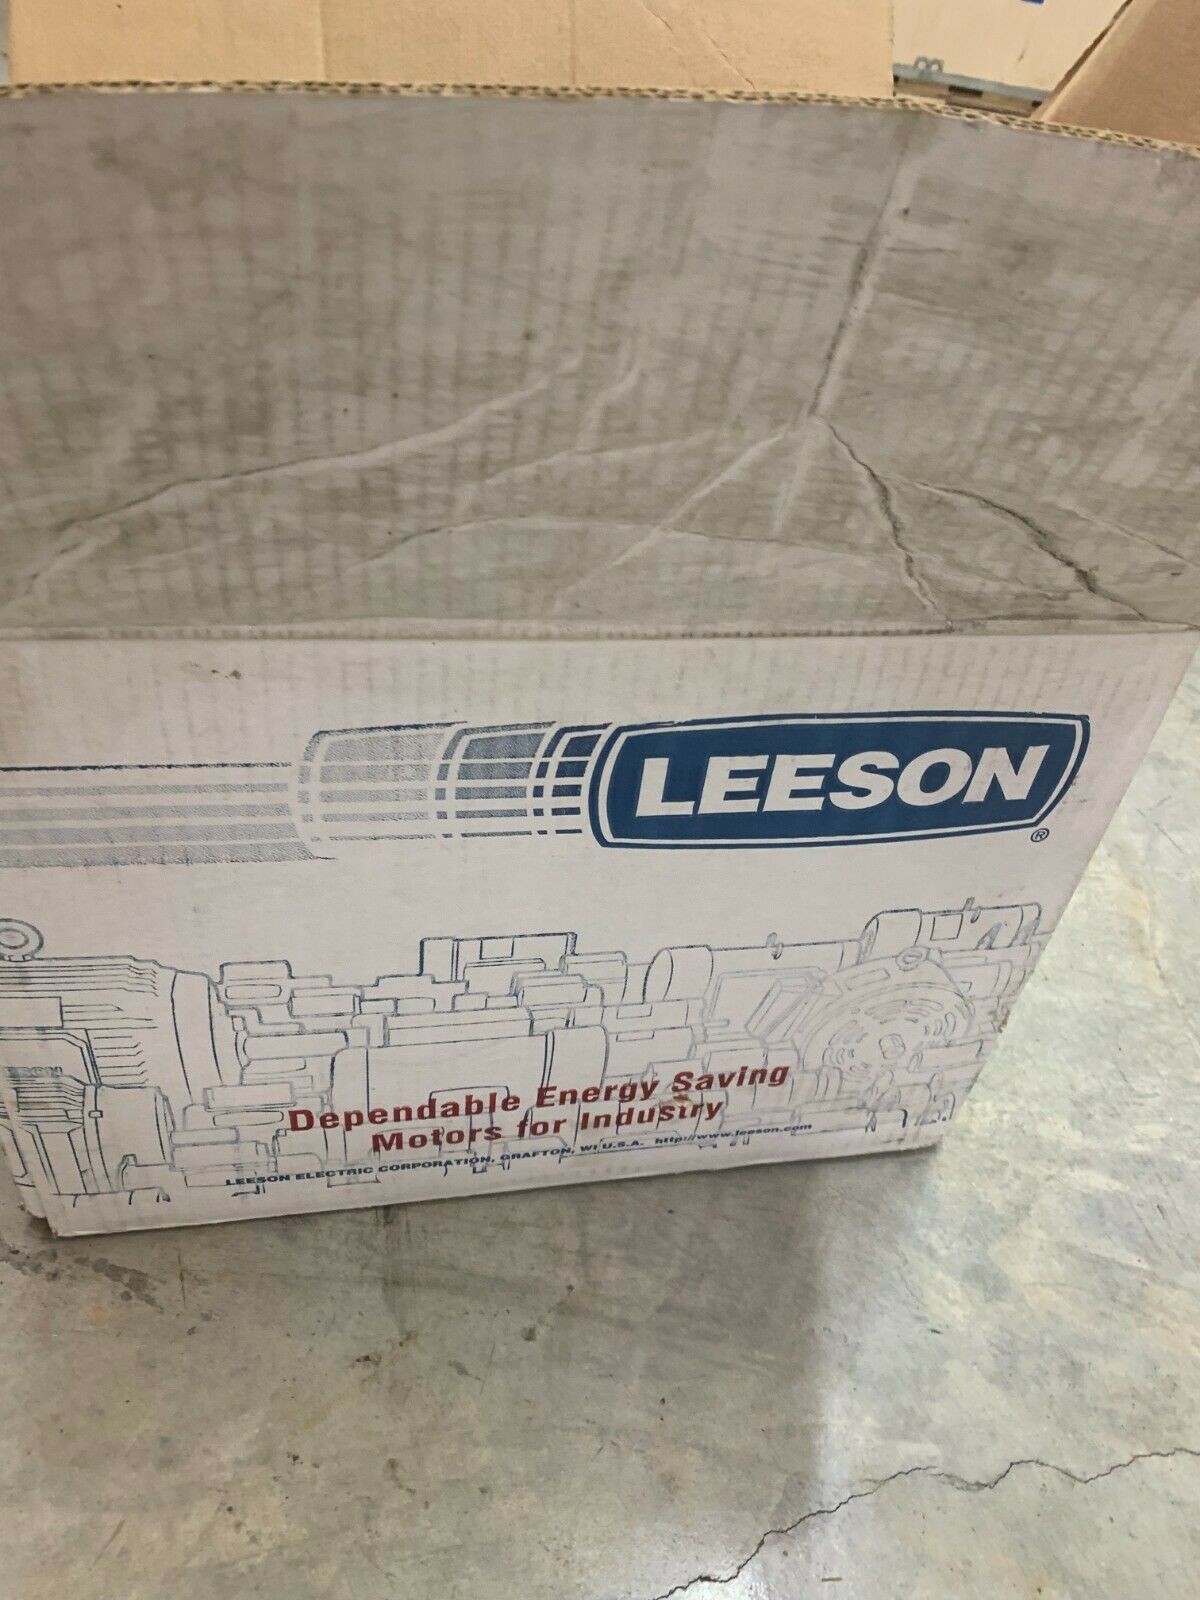 NEW LEESON G130327.00 5HP 1760RPM ELECTRIC MOTOR 208/230/460V. C184T17DK15A